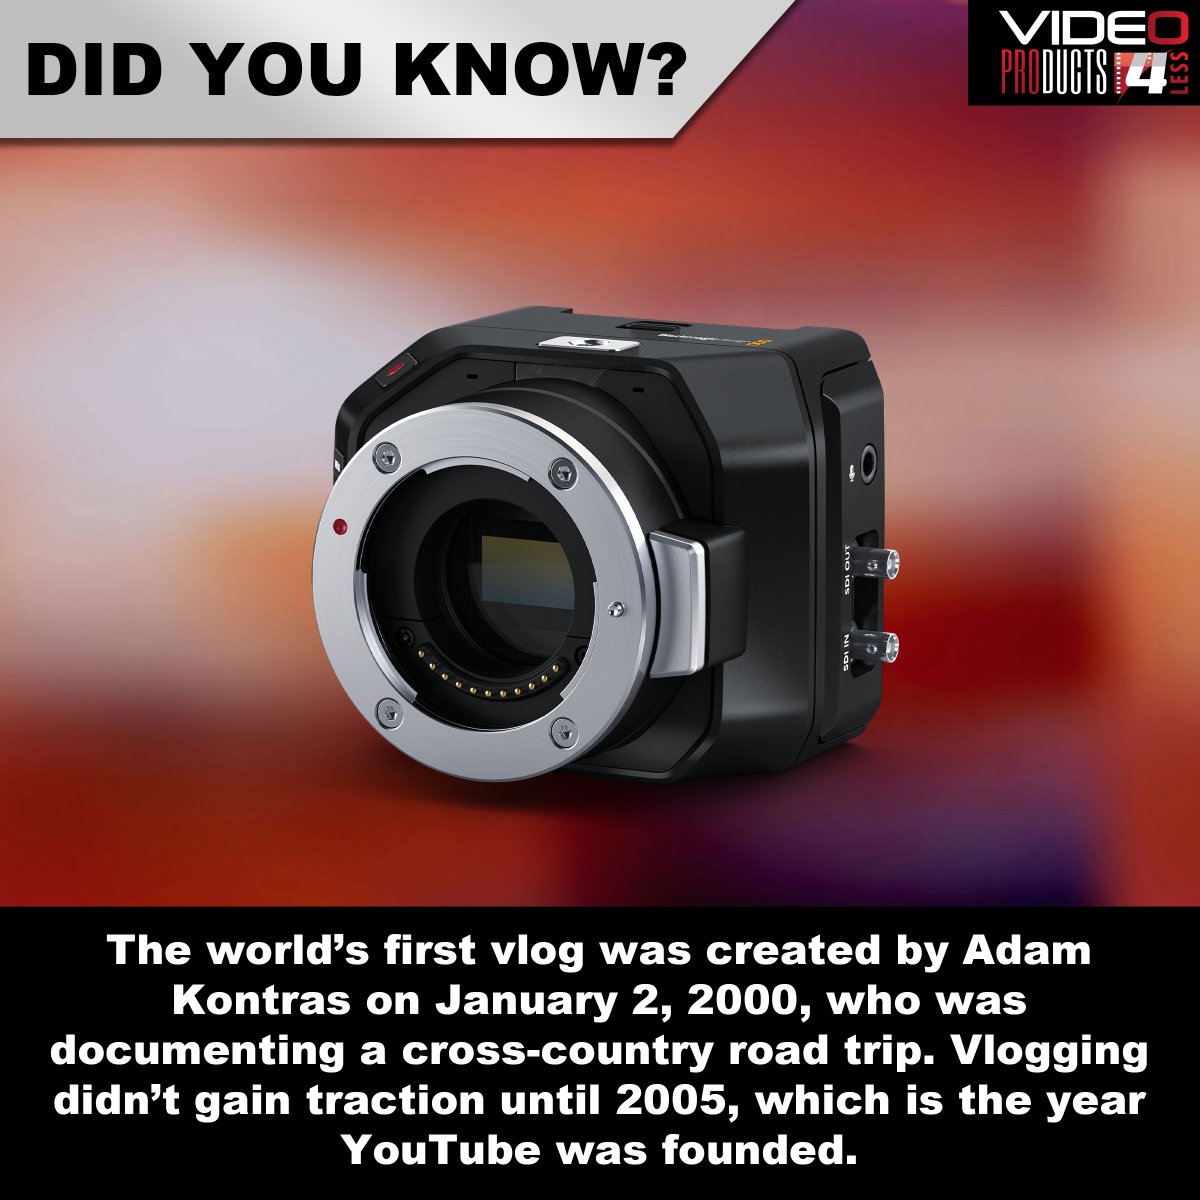 Vlogging is older than YouTube, but YouTube is what made vlogging popular!

#didyouknow #didyouknowdaily #trivia #techfacts #techtrivia #themoreyouknow #BlackmagicDesign #vlog #vlogging #vlogger #videoblog #Youtube #crosscountry #Enthusiast #online #filmmaking #filmequipment